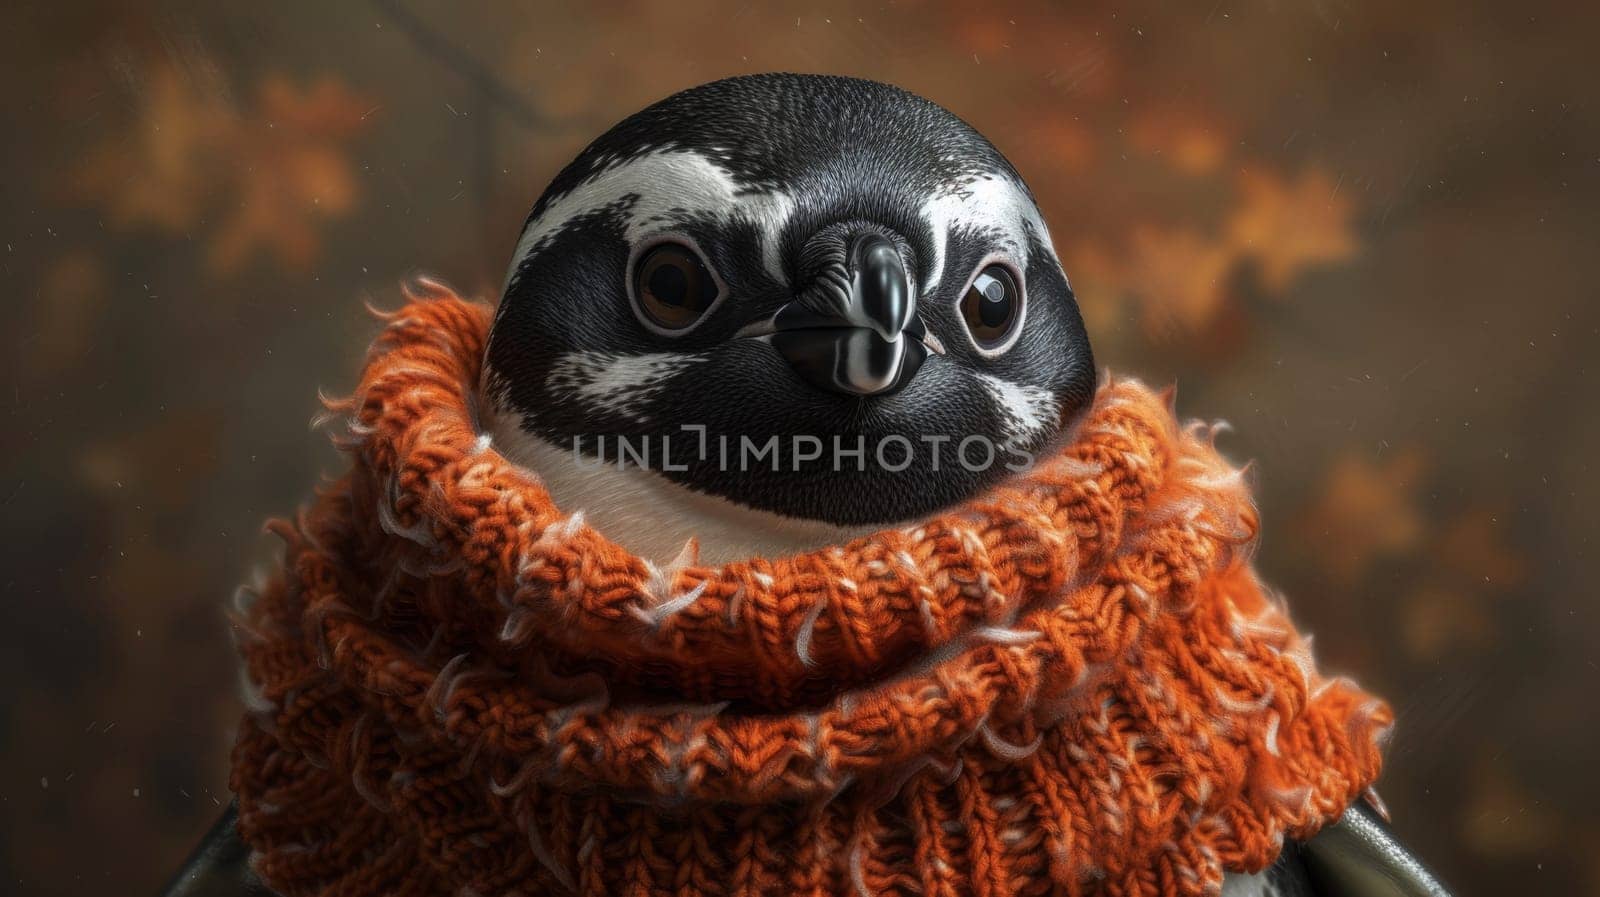 A penguin wearing a scarf and looking at the camera